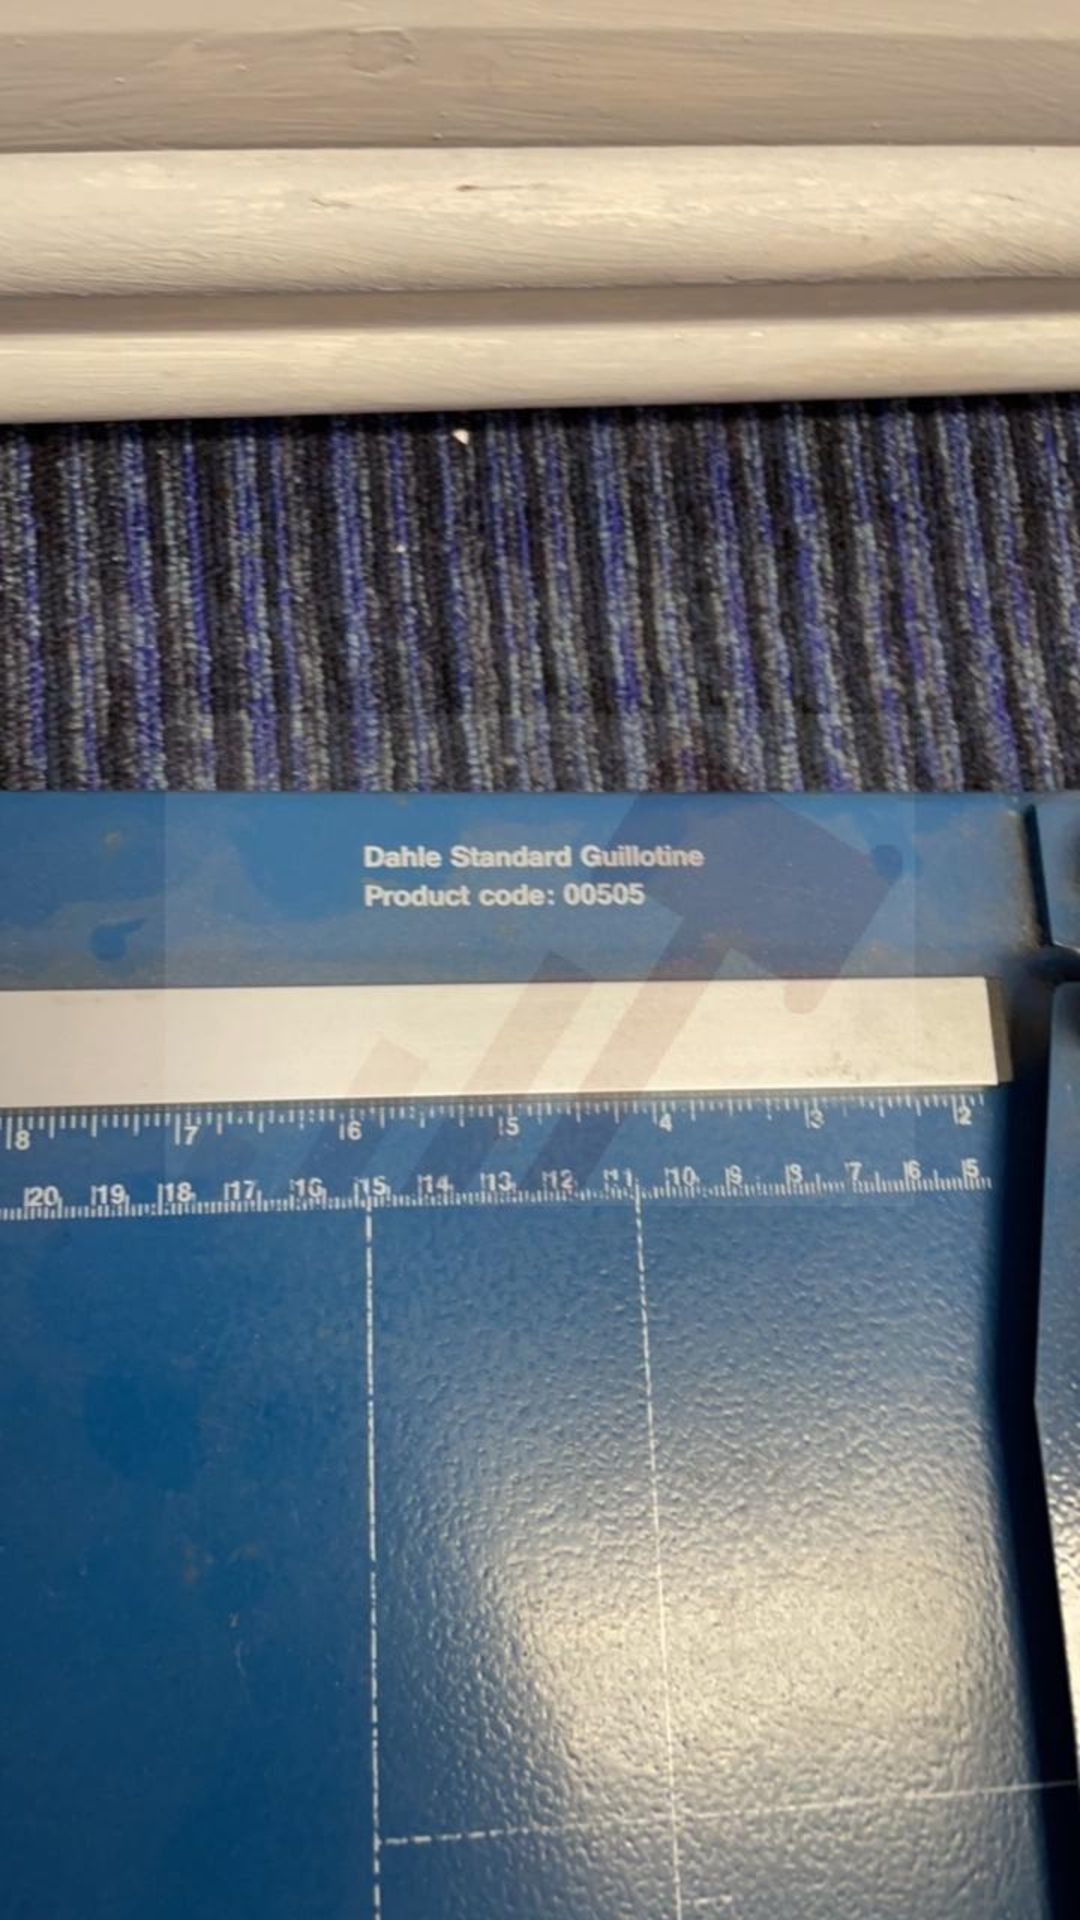 Daehle 00505 Paper Cutter/Trimmer - Image 3 of 3